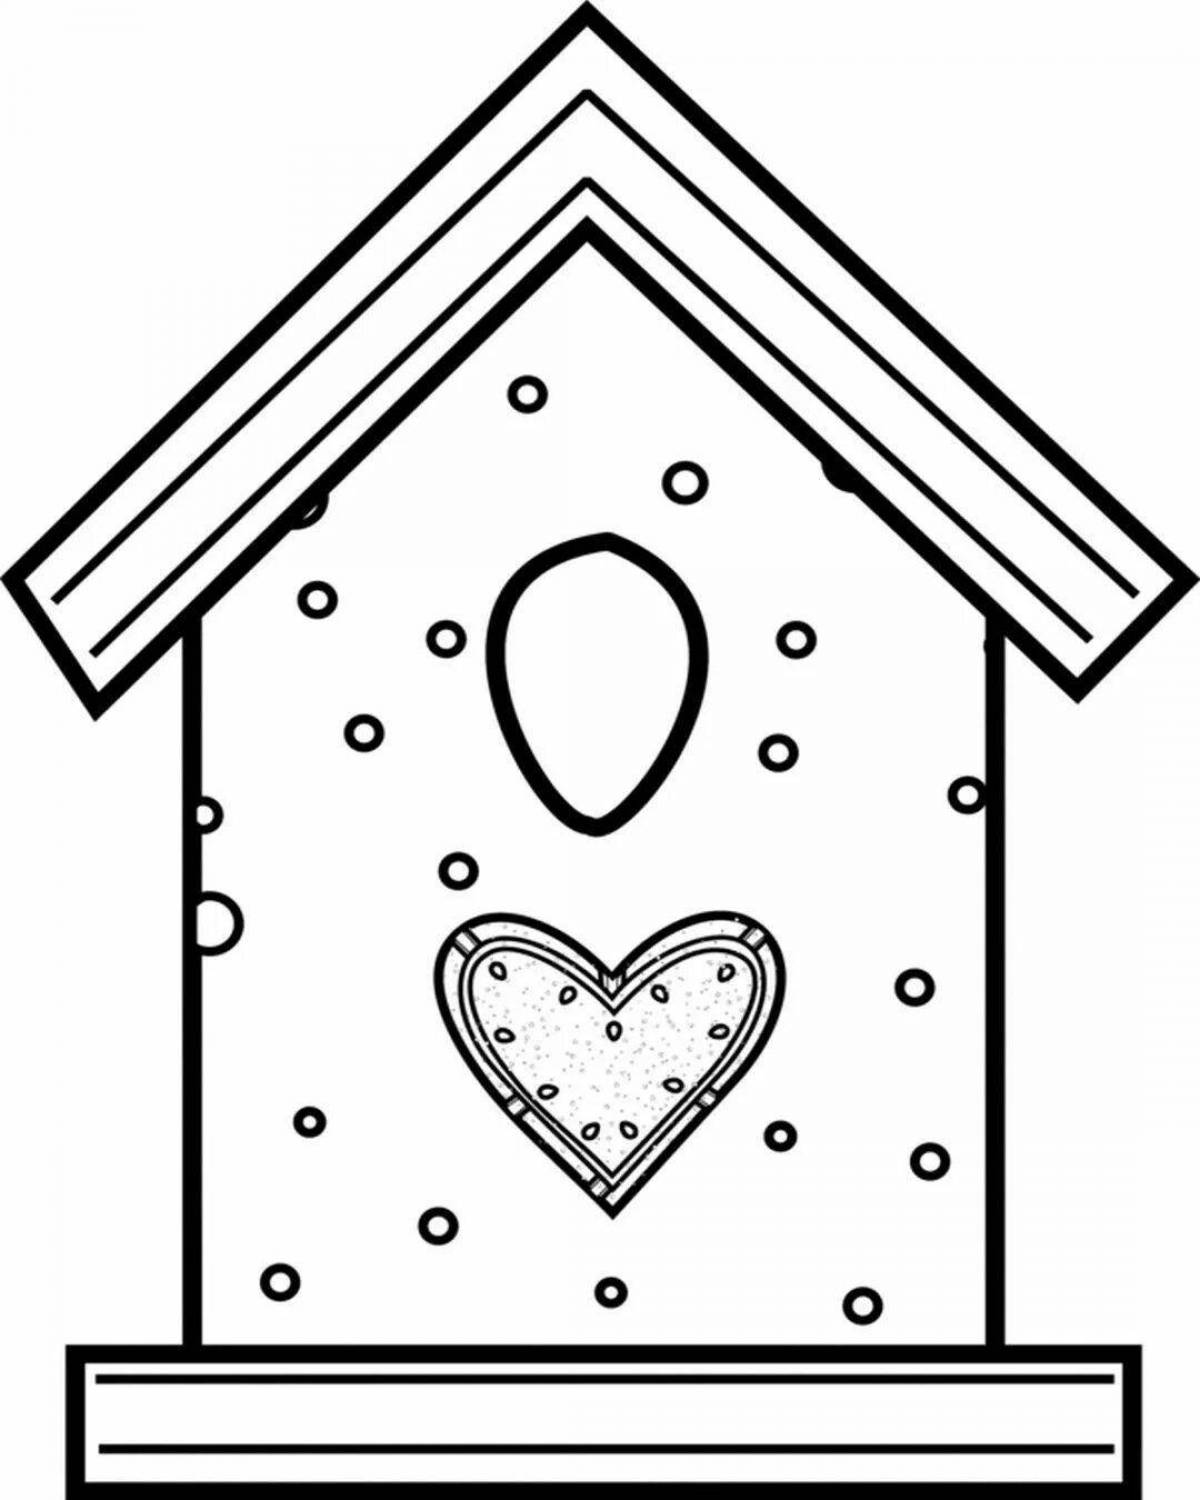 Perfect birdhouse coloring for toddlers 3-4